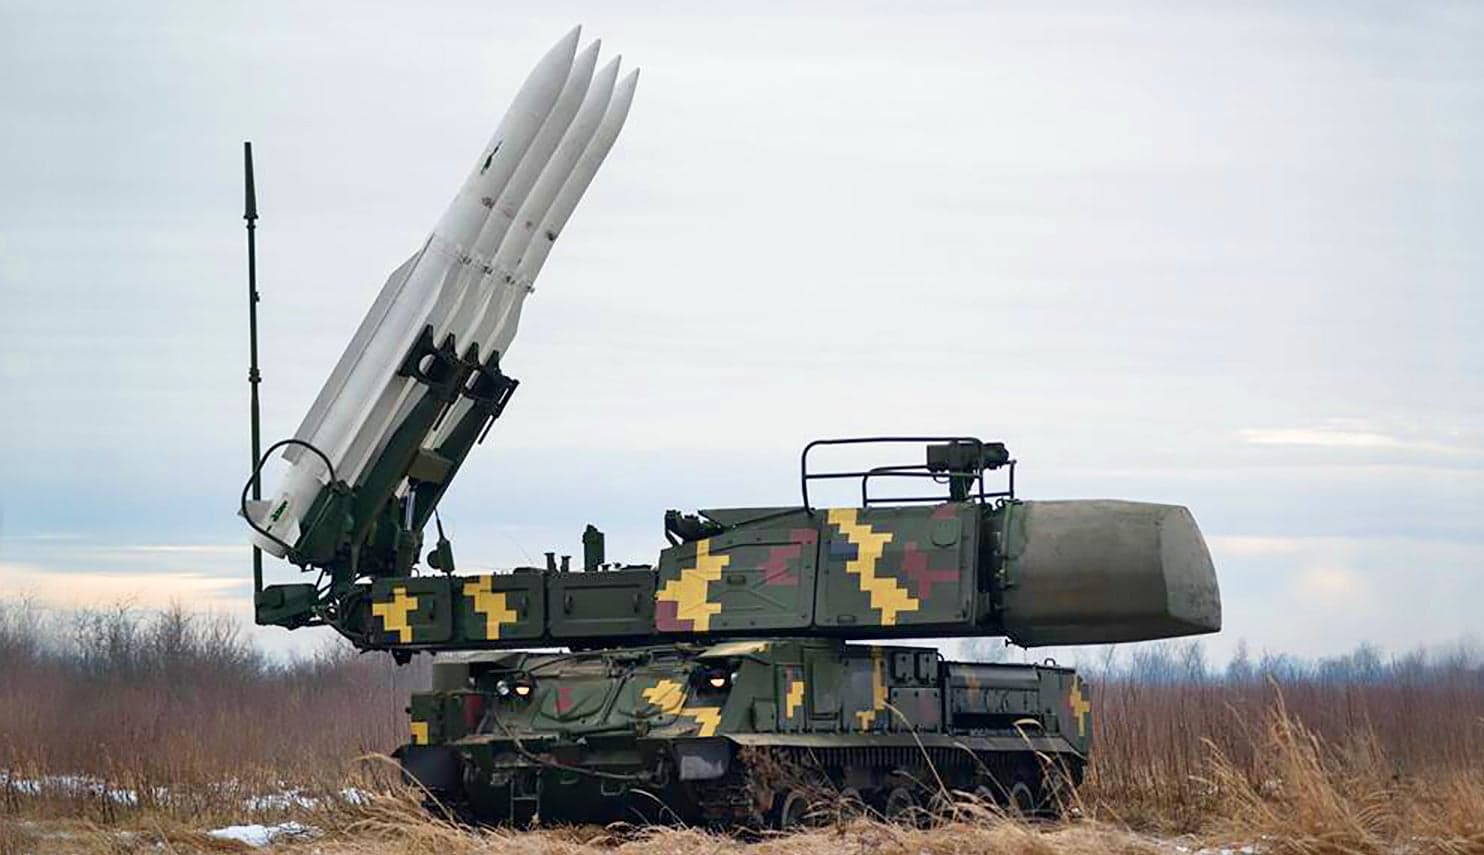 Ukraine Needs Ground-Based Air Defenses Way More Than MiGs. Here Are The Best Options